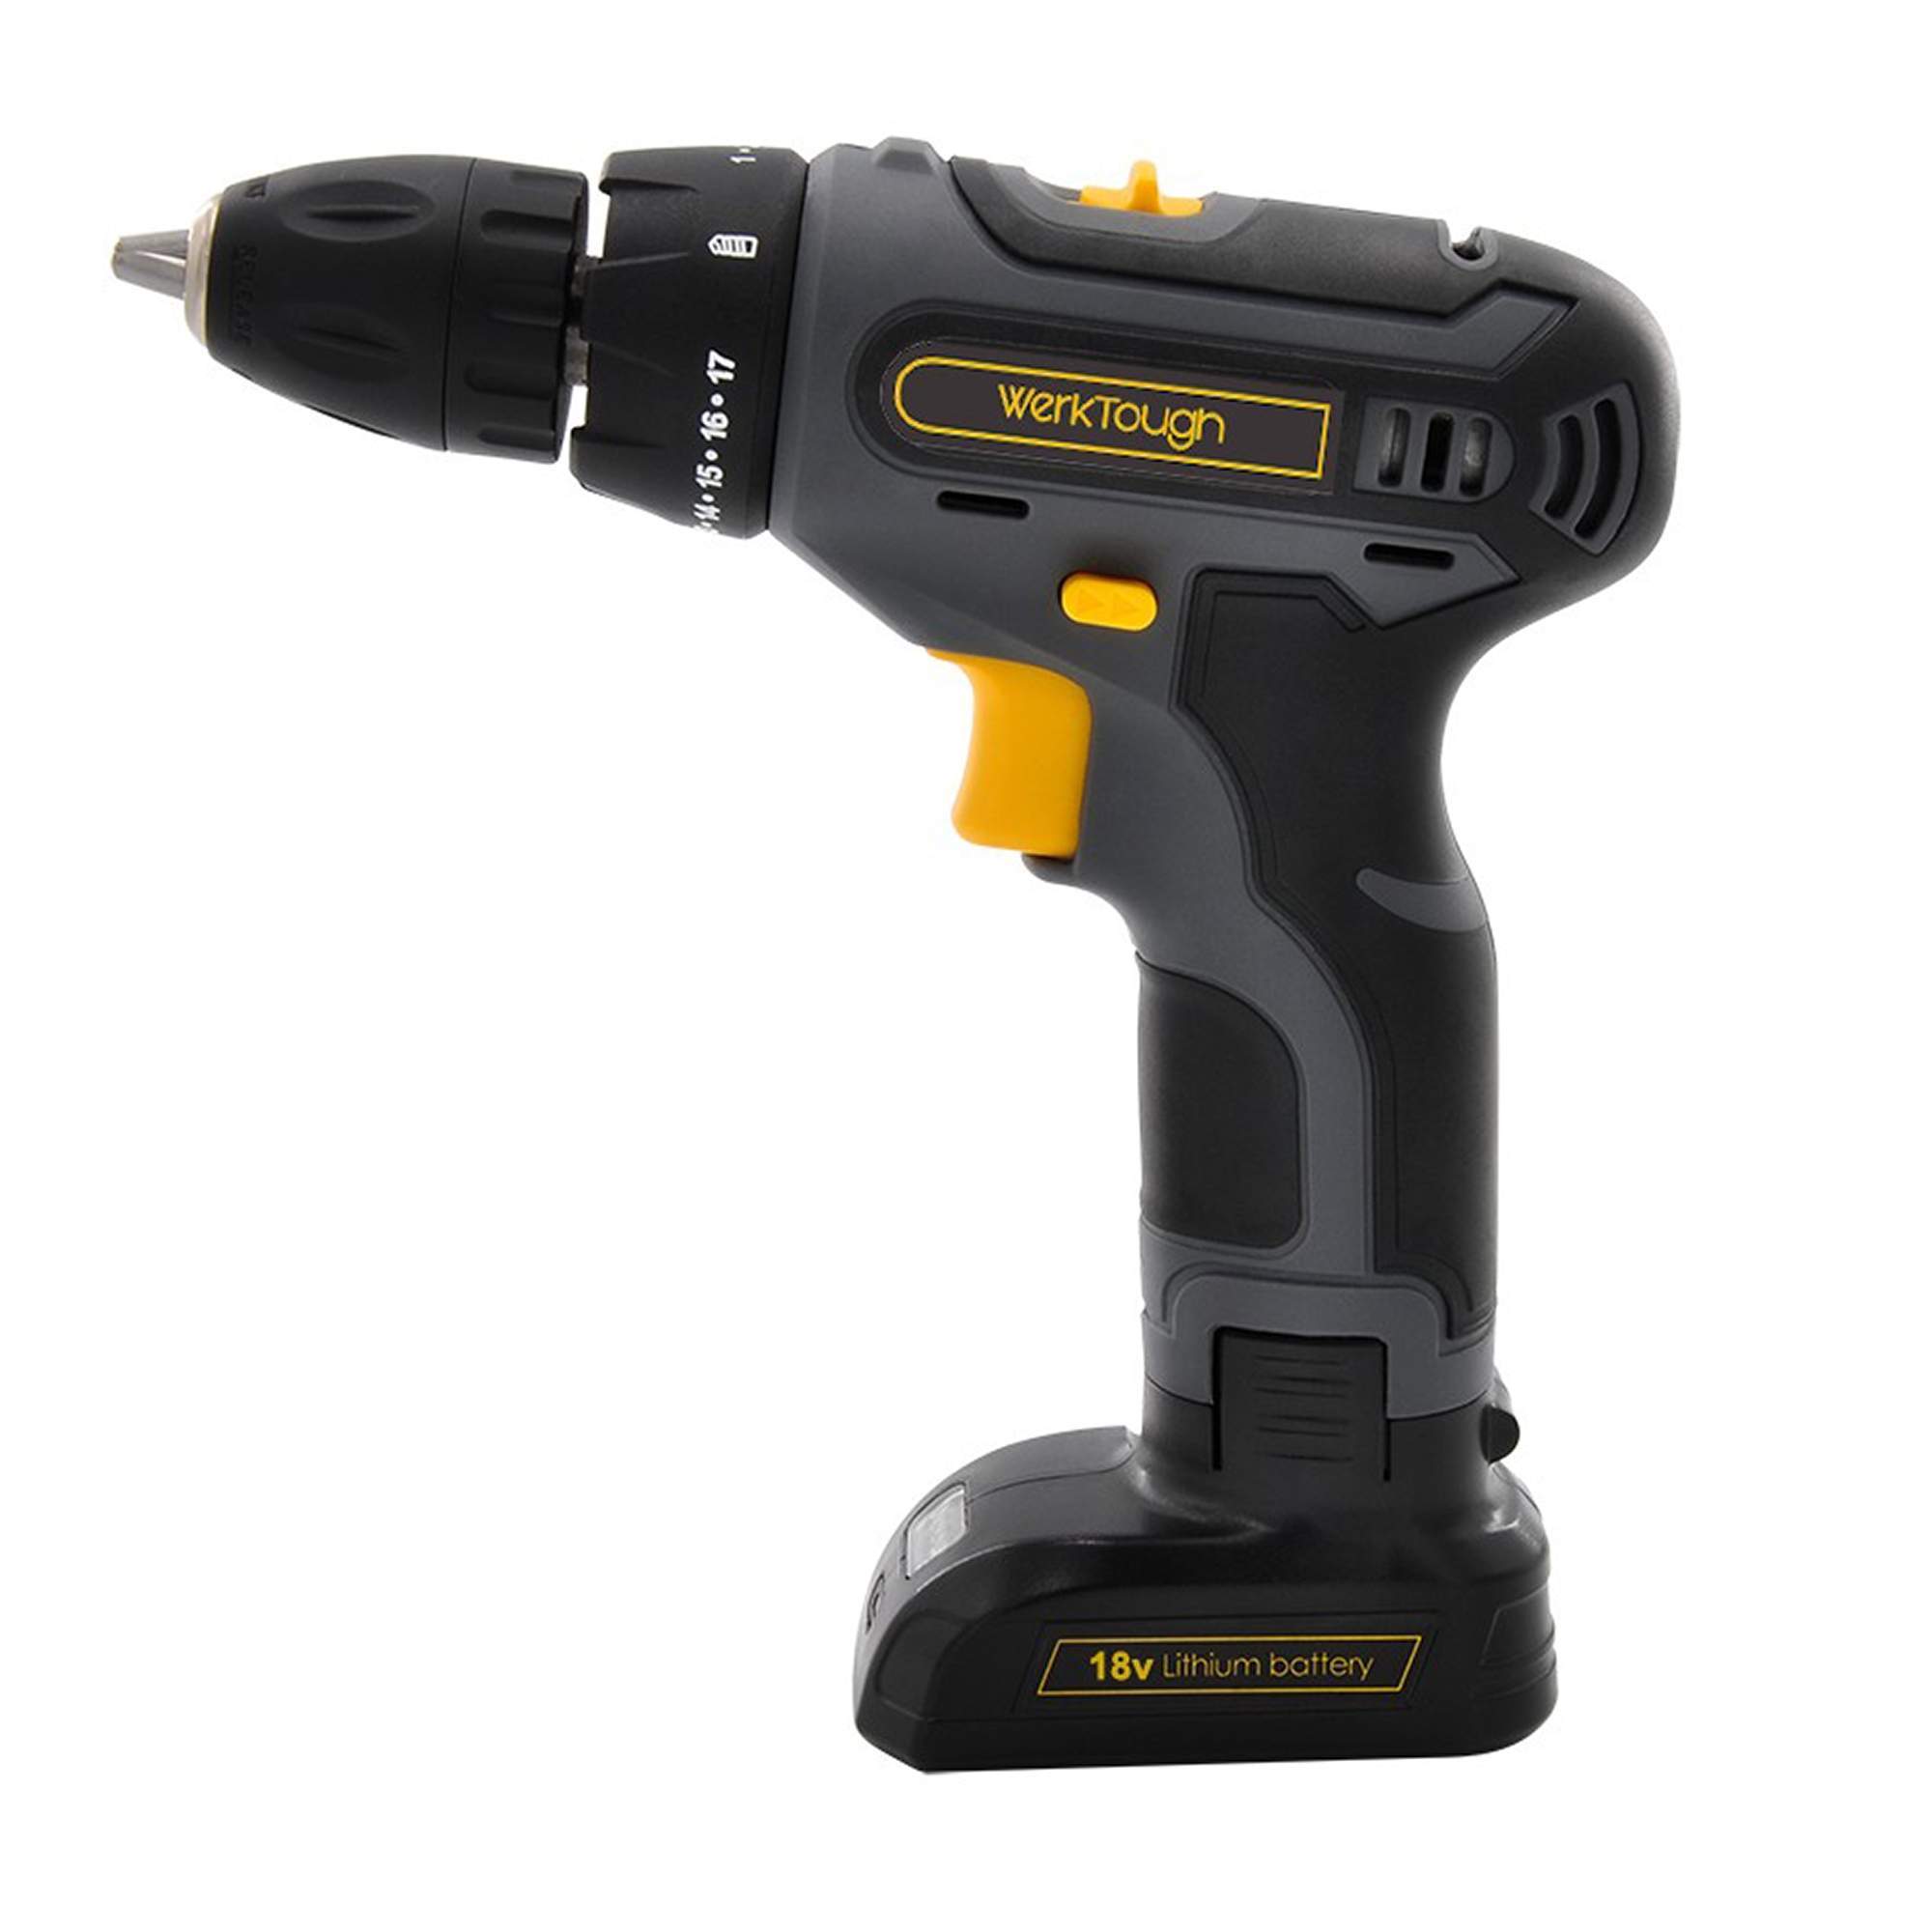 Shop Variable Speed Electric Switch Drill and Screwdriver | Toolots